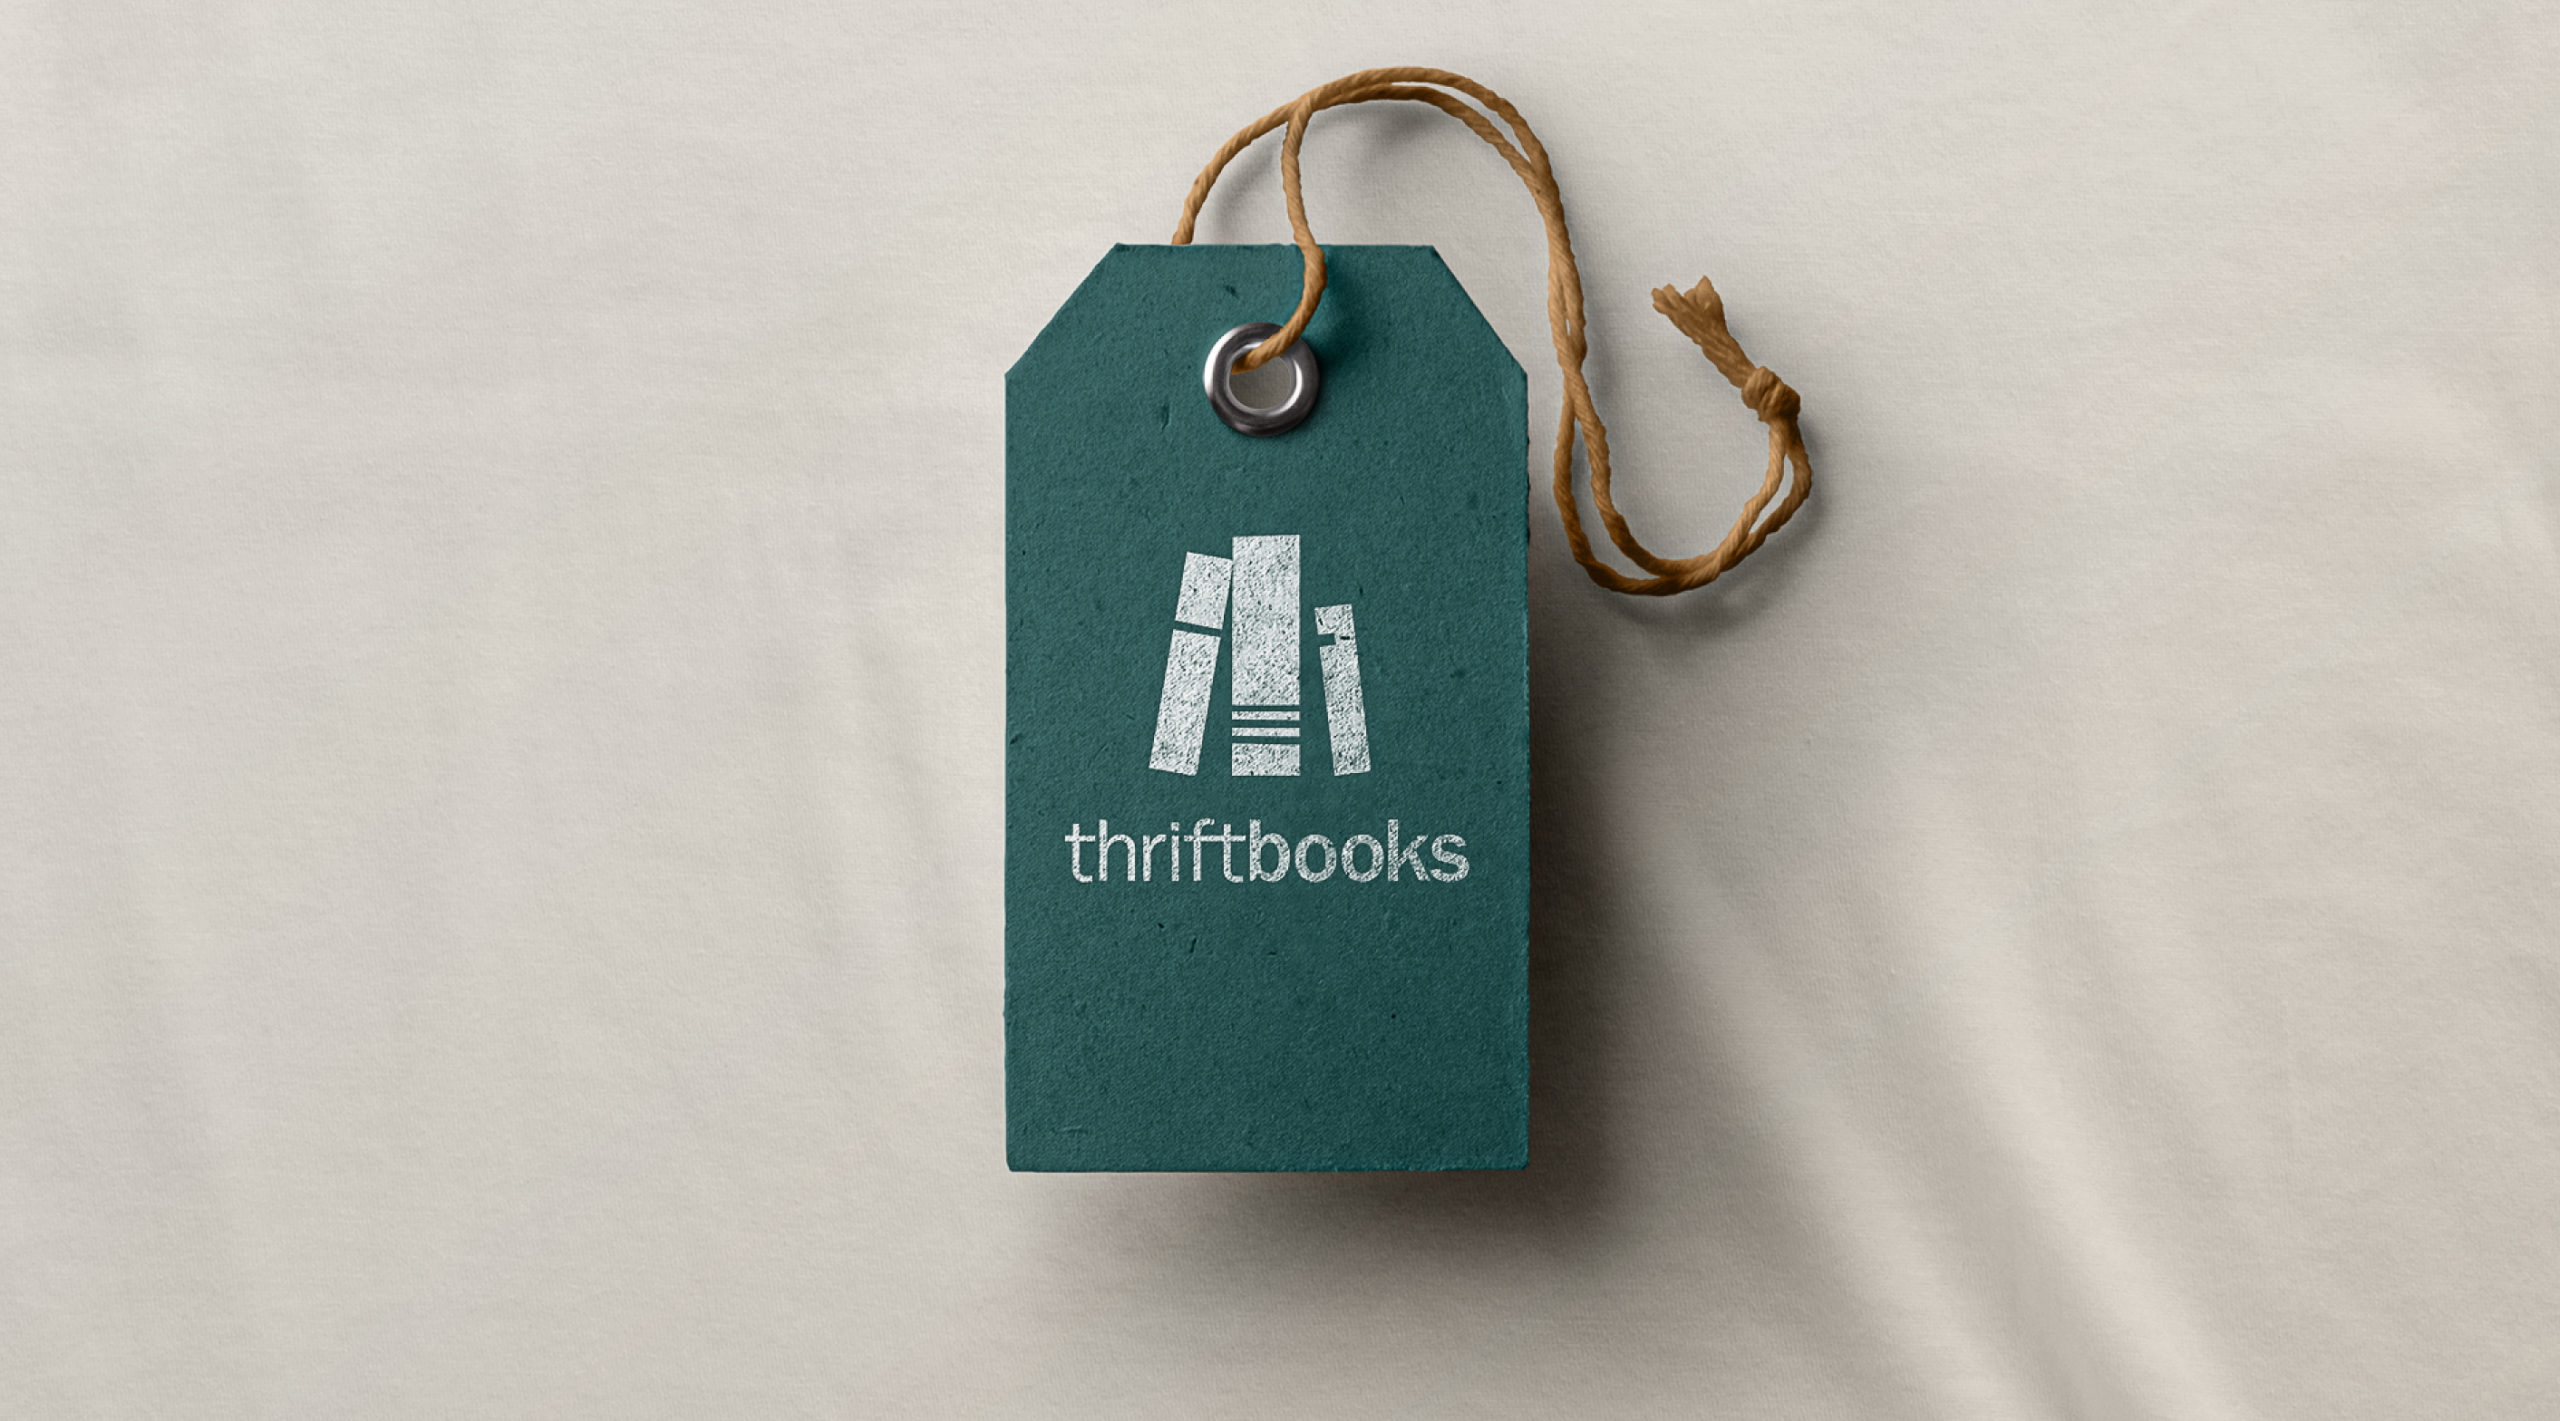 Best Sellers  New & Used Books from ThriftBooks